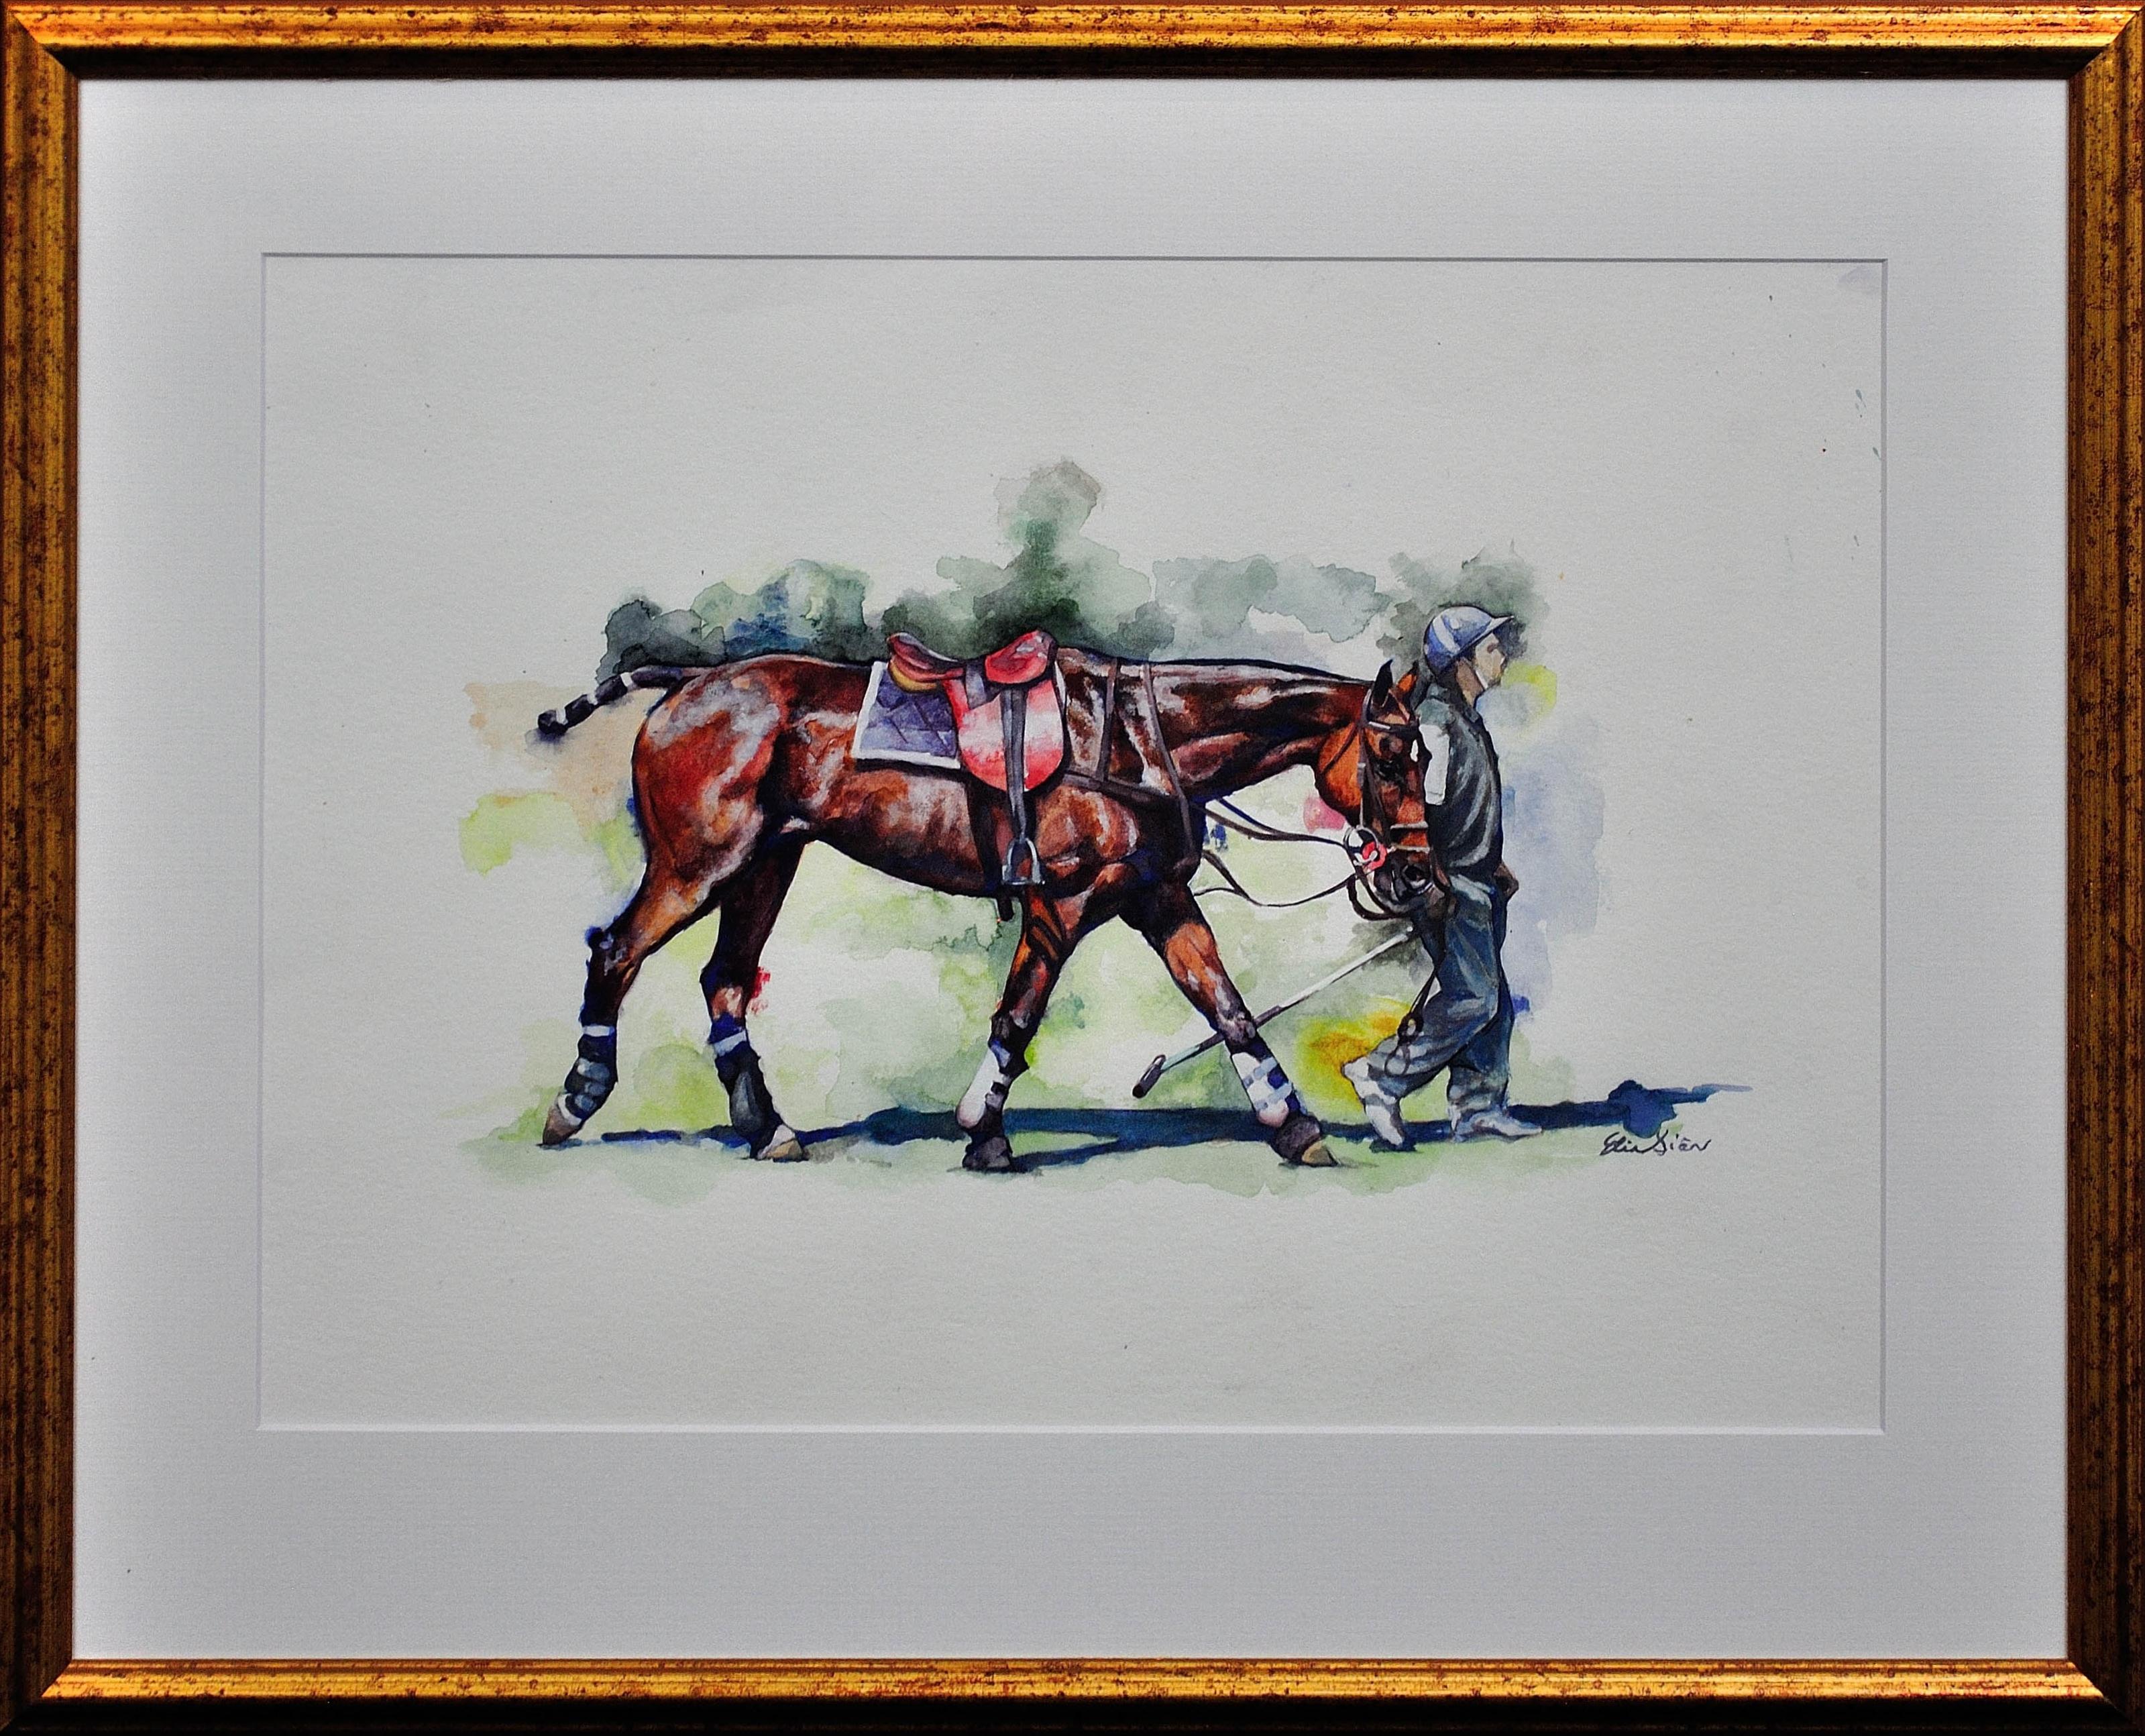 Polo Match, Cirencester, Player Leading Pony. Cotswolds. Framed Watercolor.